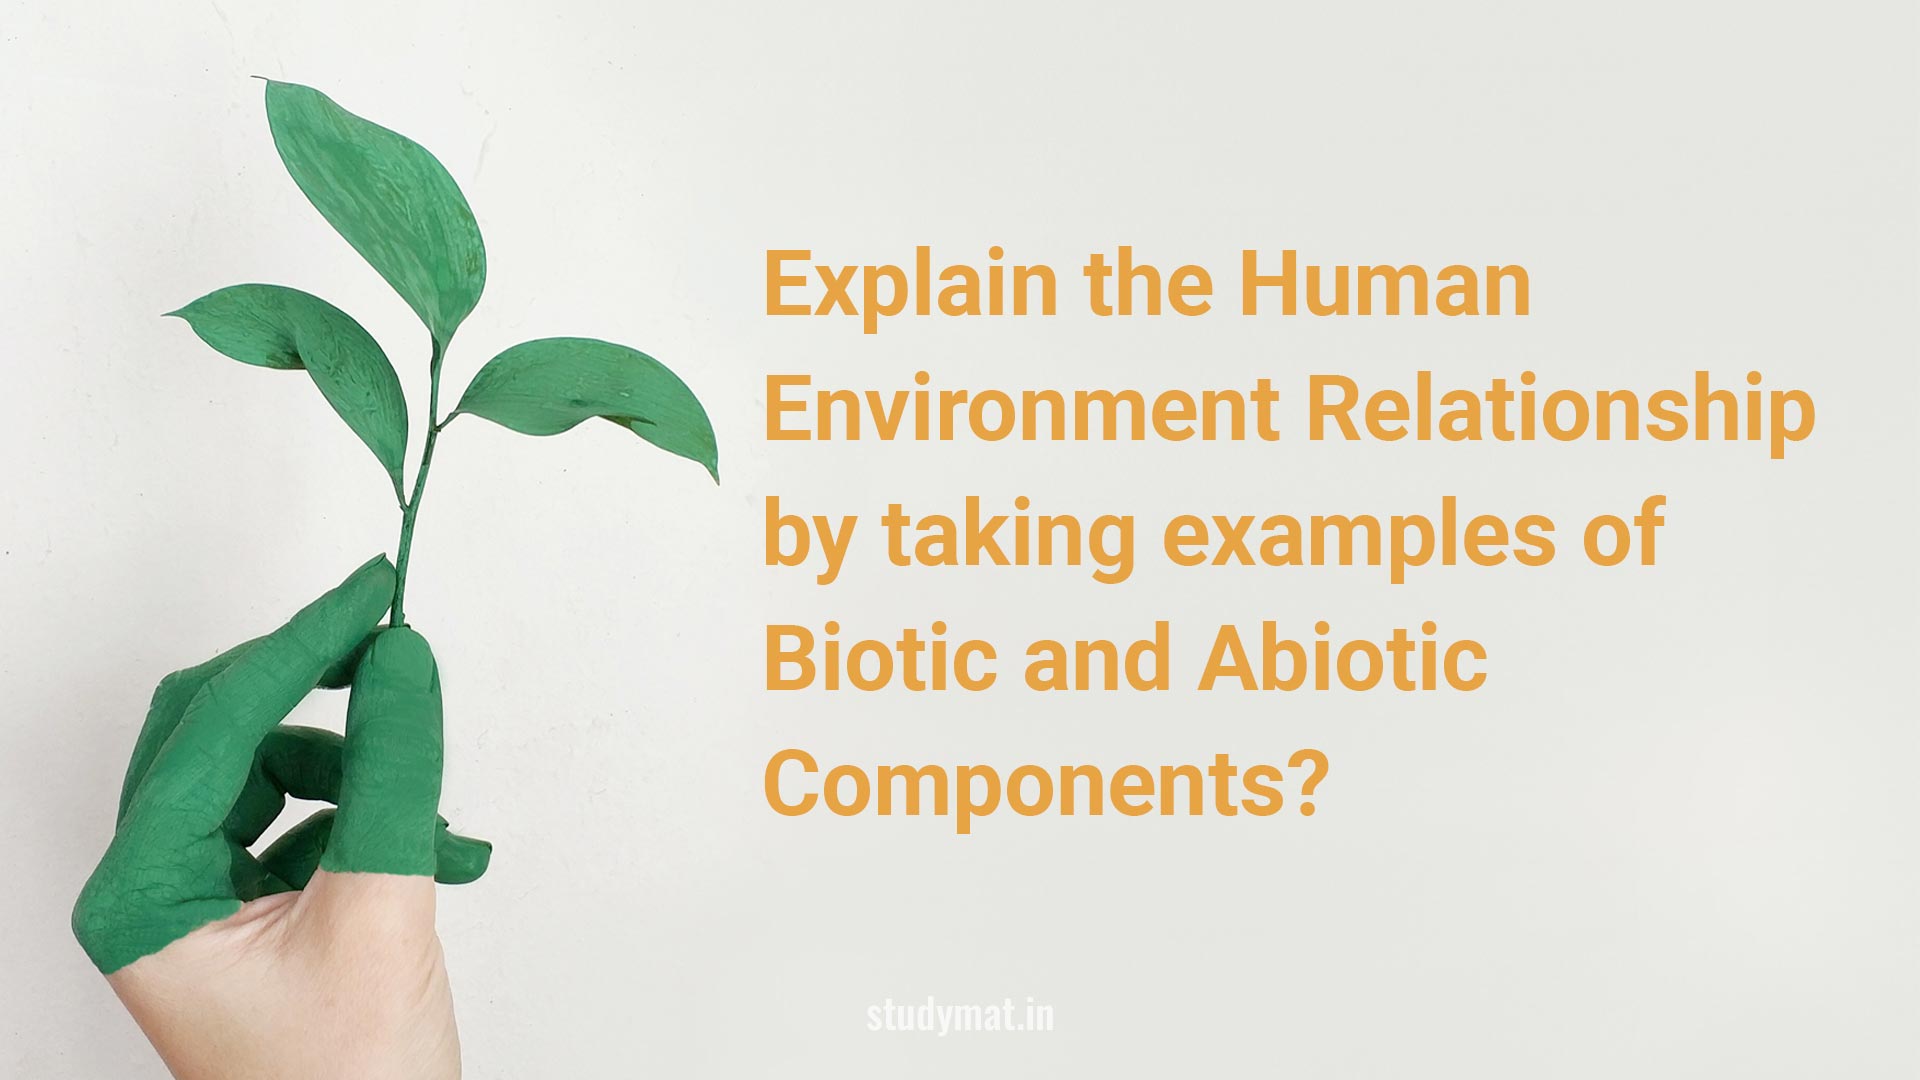 Human-Environment Relationship by taking examples of Biotic and Abiotic Components.